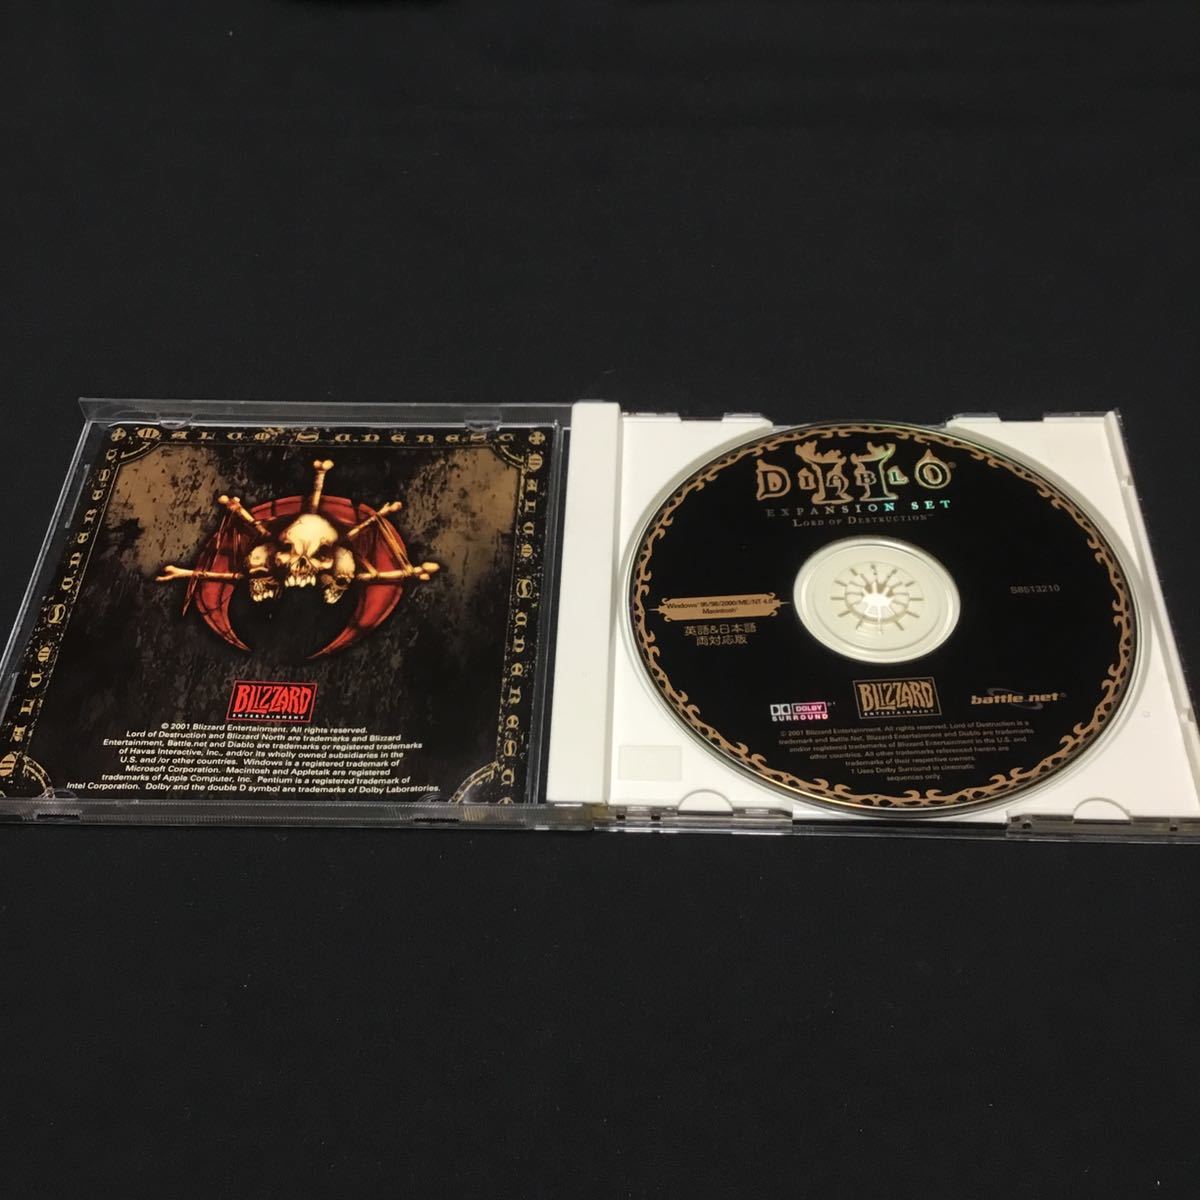 Windows95/98/Me/2000/MacOS8.1 on and after CD soft DIABLO II:Lord of Destruction -EXPANSION SET- English * Japanese both correspondence version 